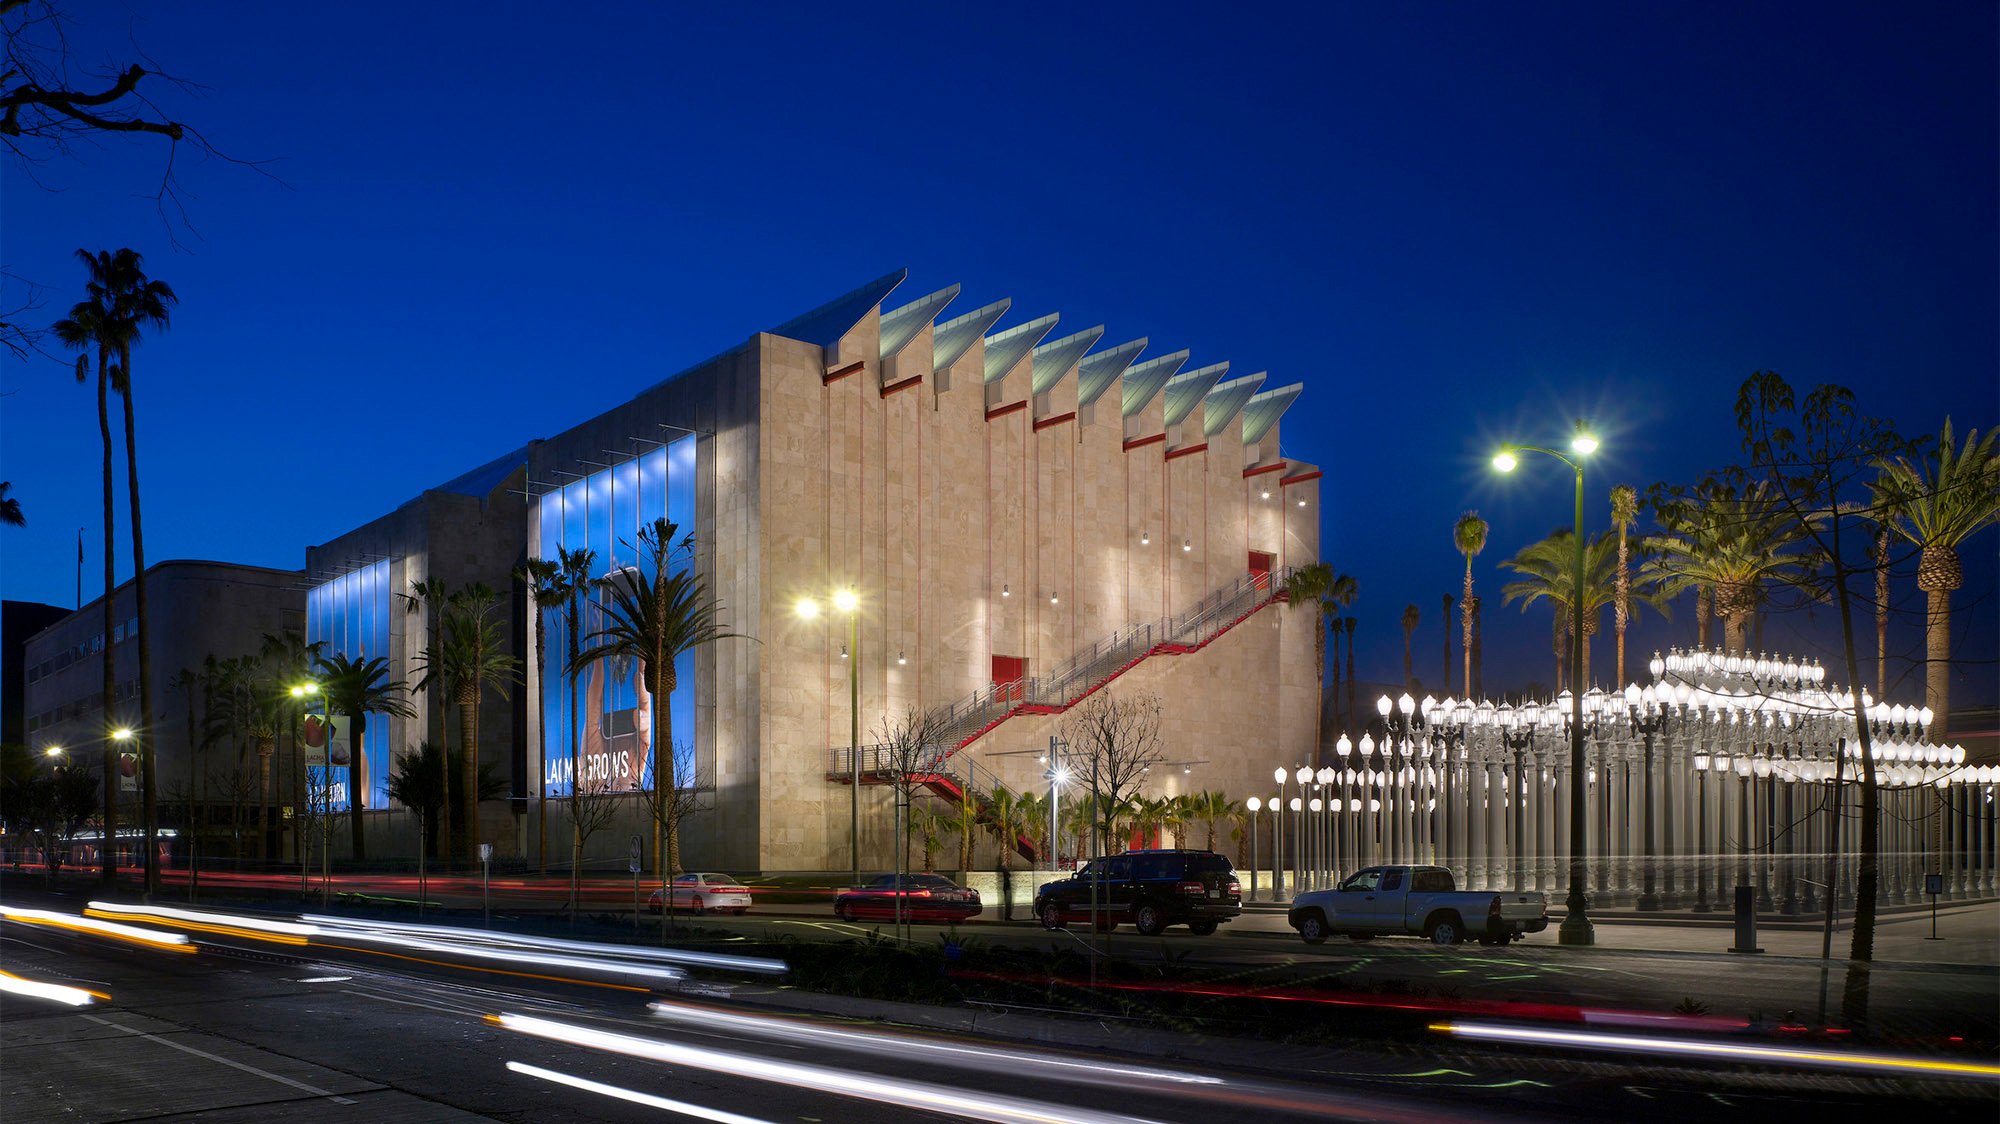 The Los Angeles County Museum of Art (LACMA) Phase 1